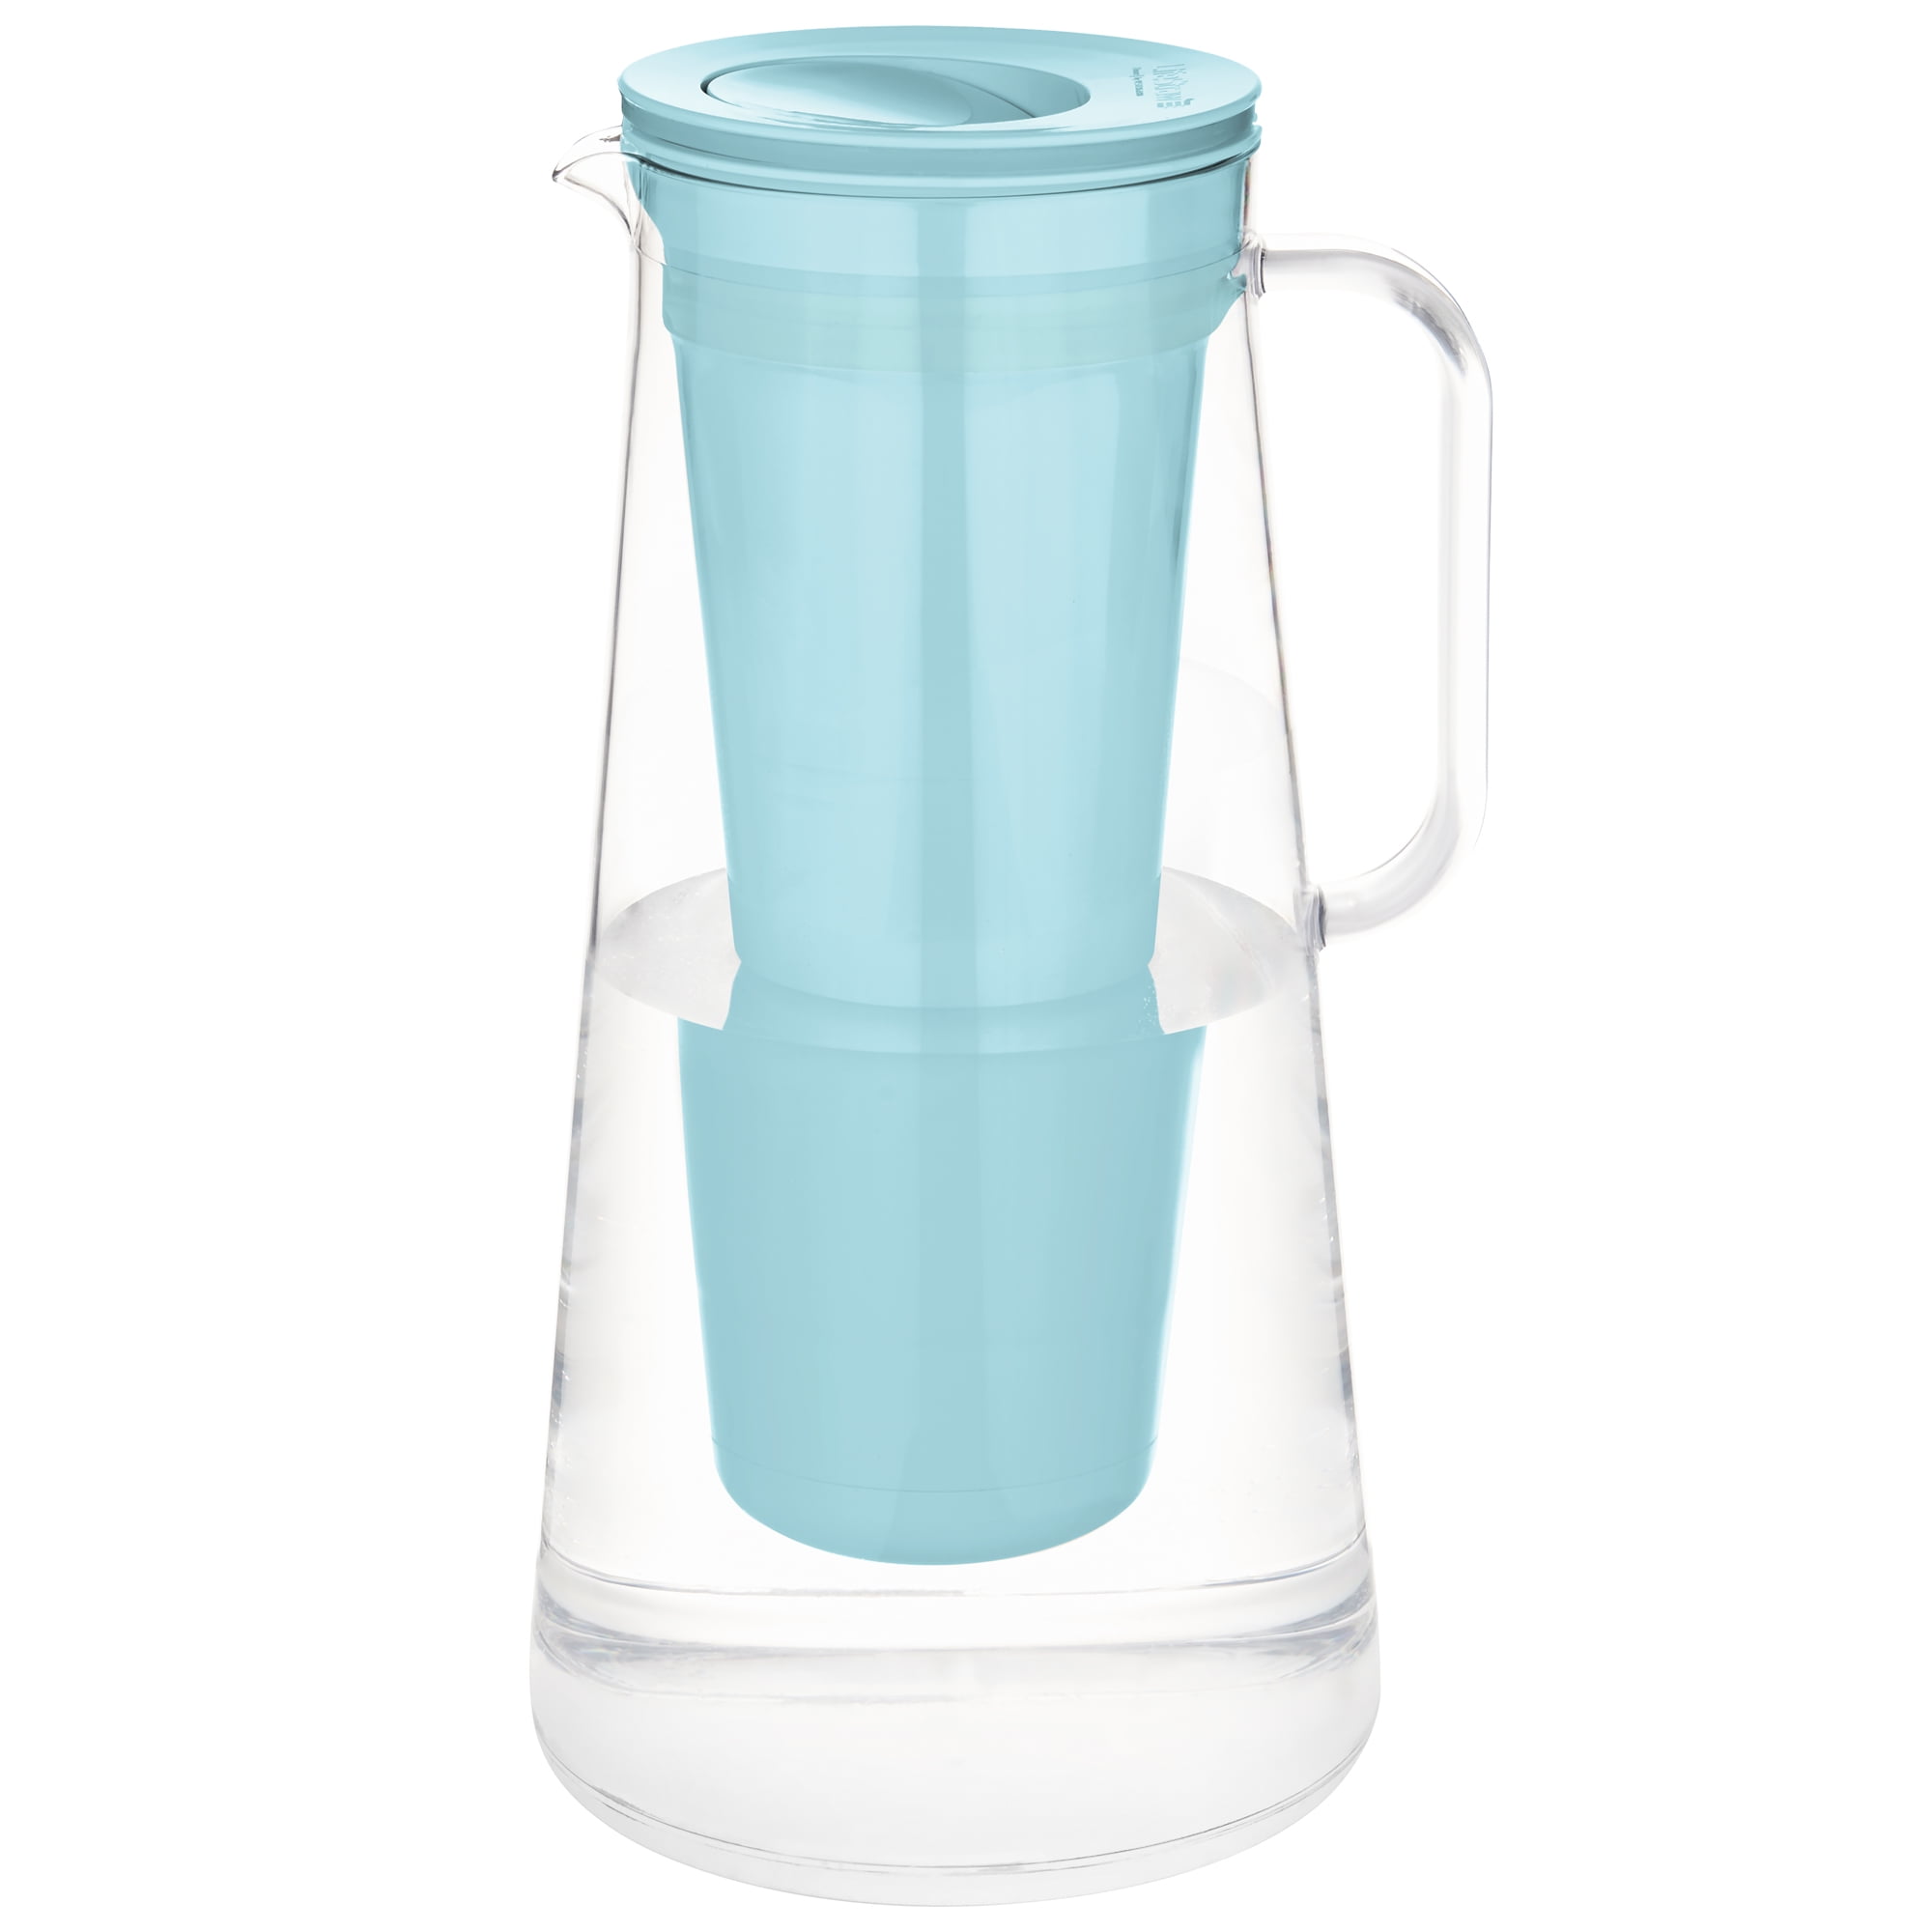 LifeStraw Home  Pitcher Replacement – LifeStraw Water Filters & Purifiers